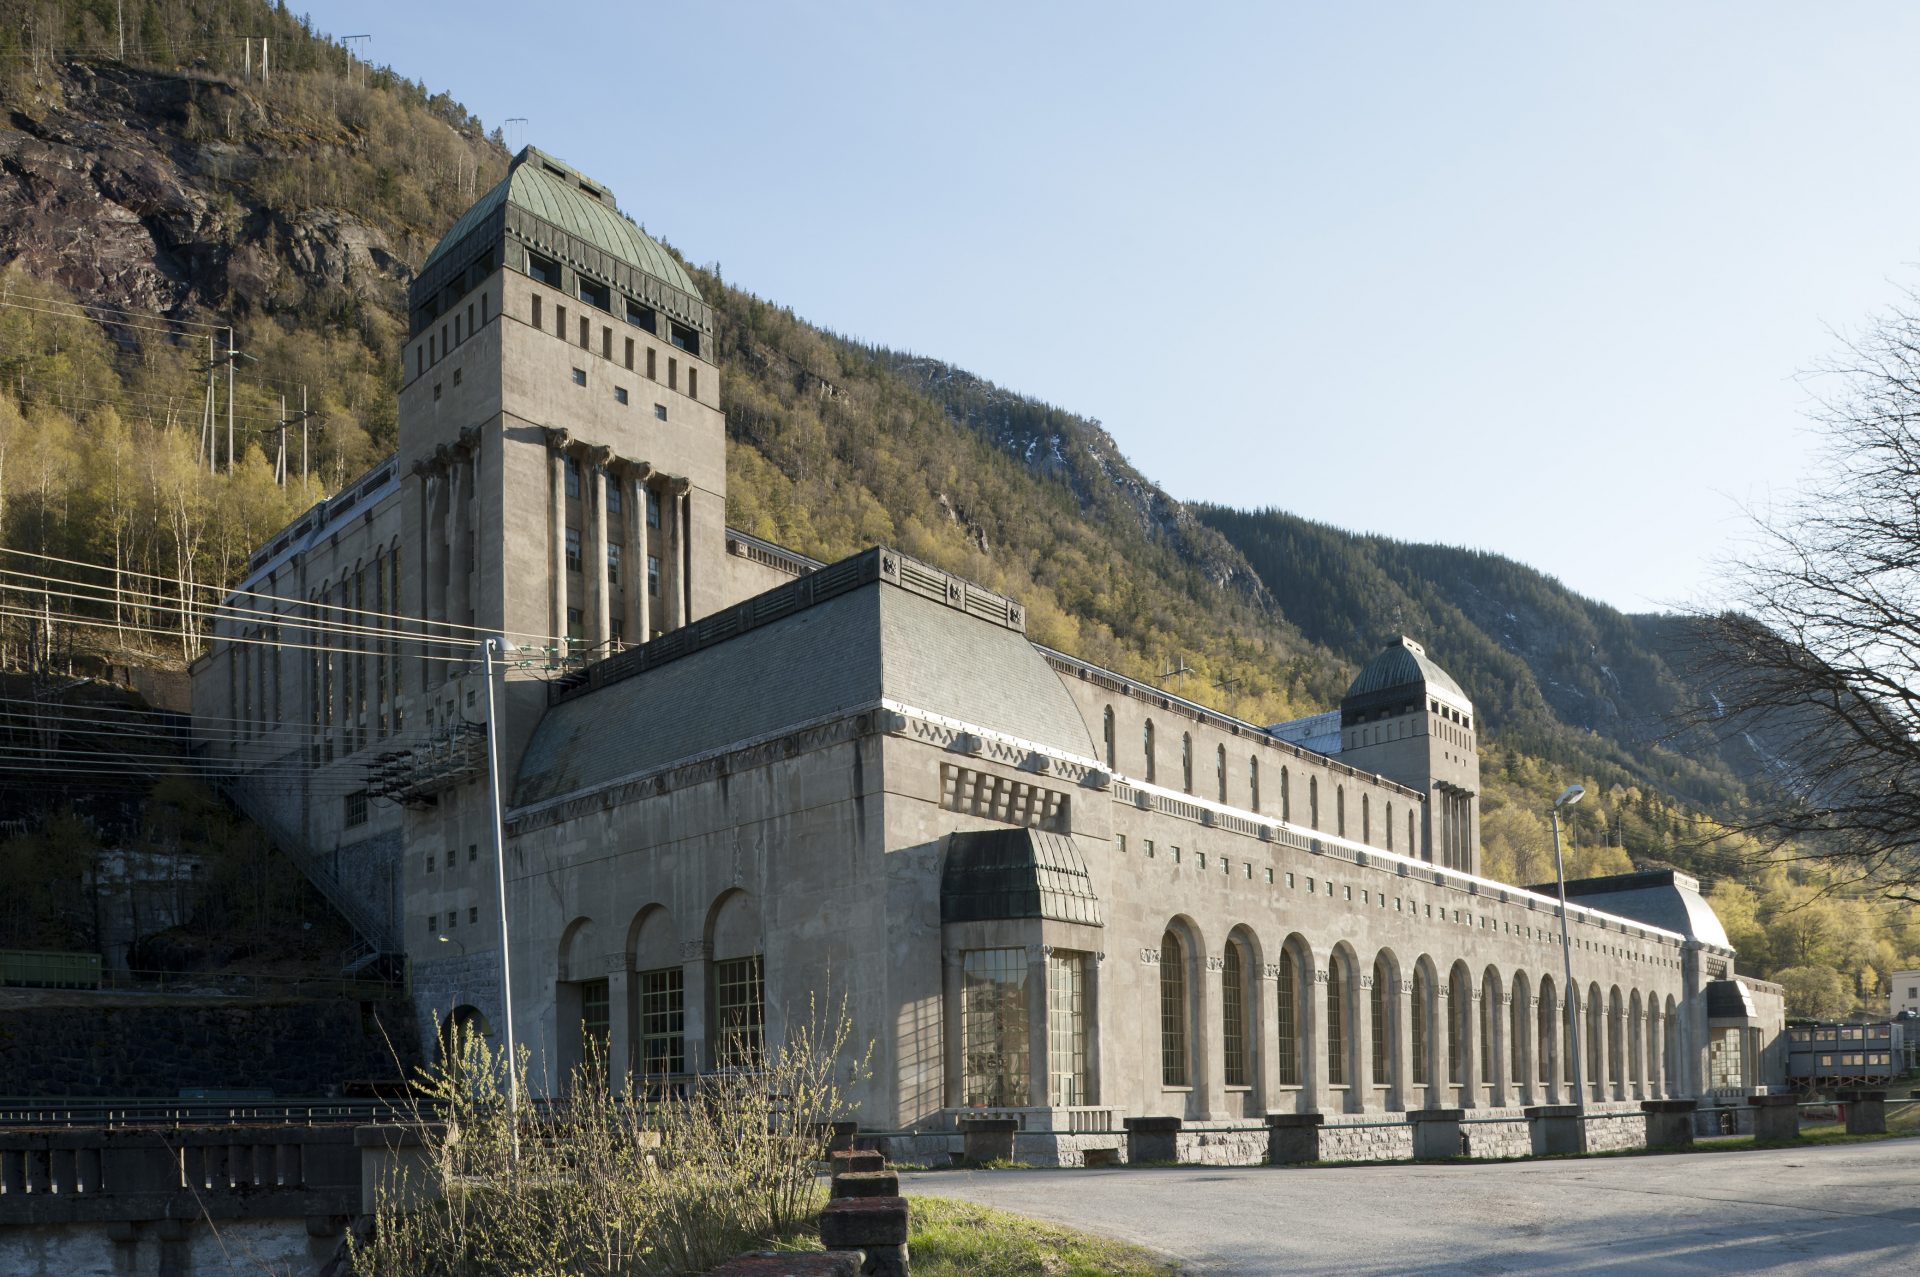 Såheim power station in Rjukan was accorded listed status in 2003. Såheim is part of the Rjukan-Notodden Industrial Heritage Site and thus included on the UNESCO World Heritage List. Built in 1914 based on plans by architect Thorvald Astrup and Professor Olaf Nordhagen. Photo: Per Berntsen